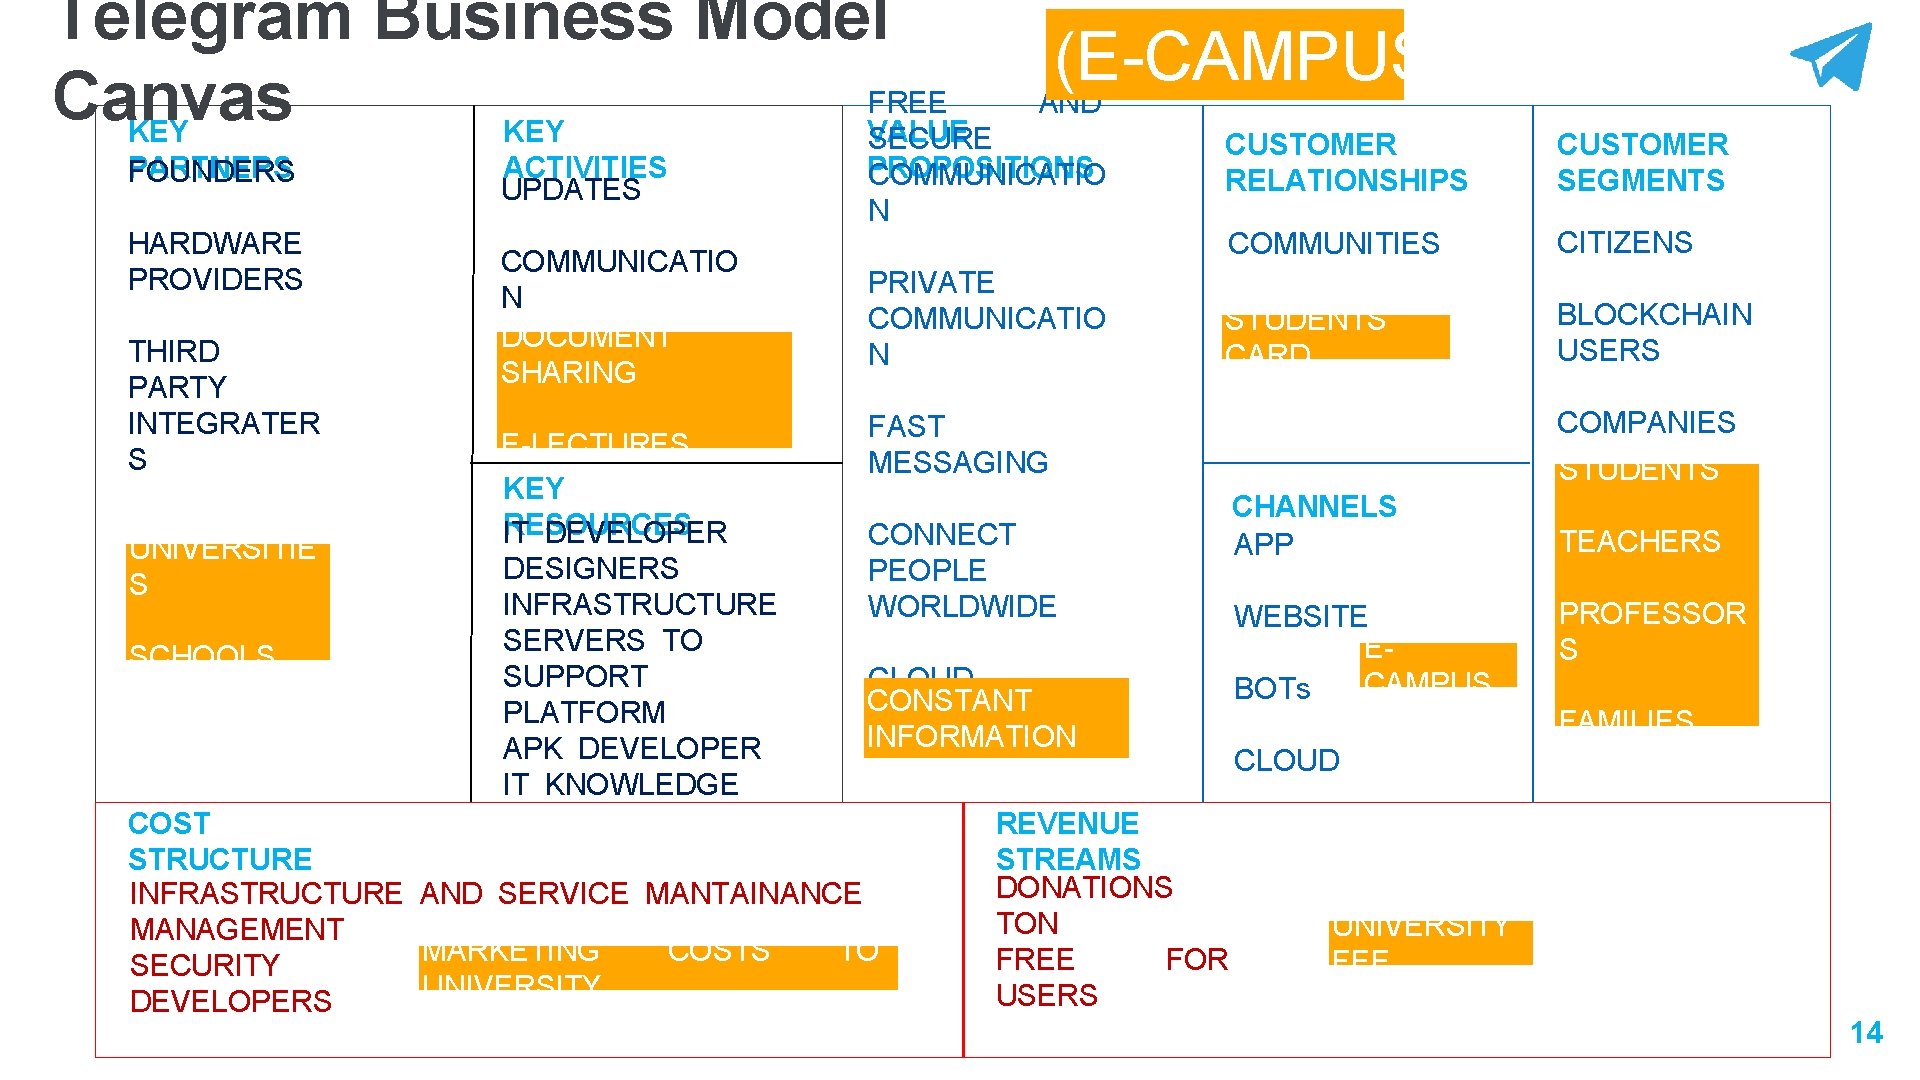 Telegram Business Model (E-CAMPUS) FREE AND Canvas VALUE KEY SECURE PARTNERS FOUNDERS HARDWARE PROVIDERS